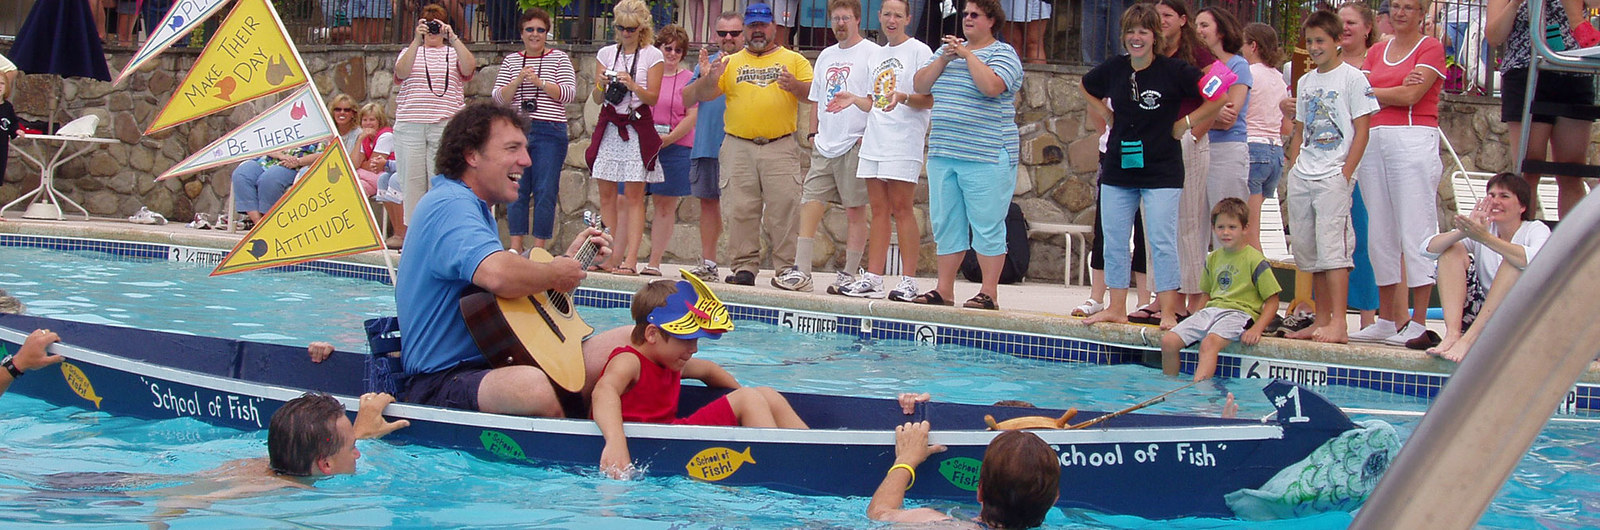 Man playing guitar in a boat in the pool at a team building event